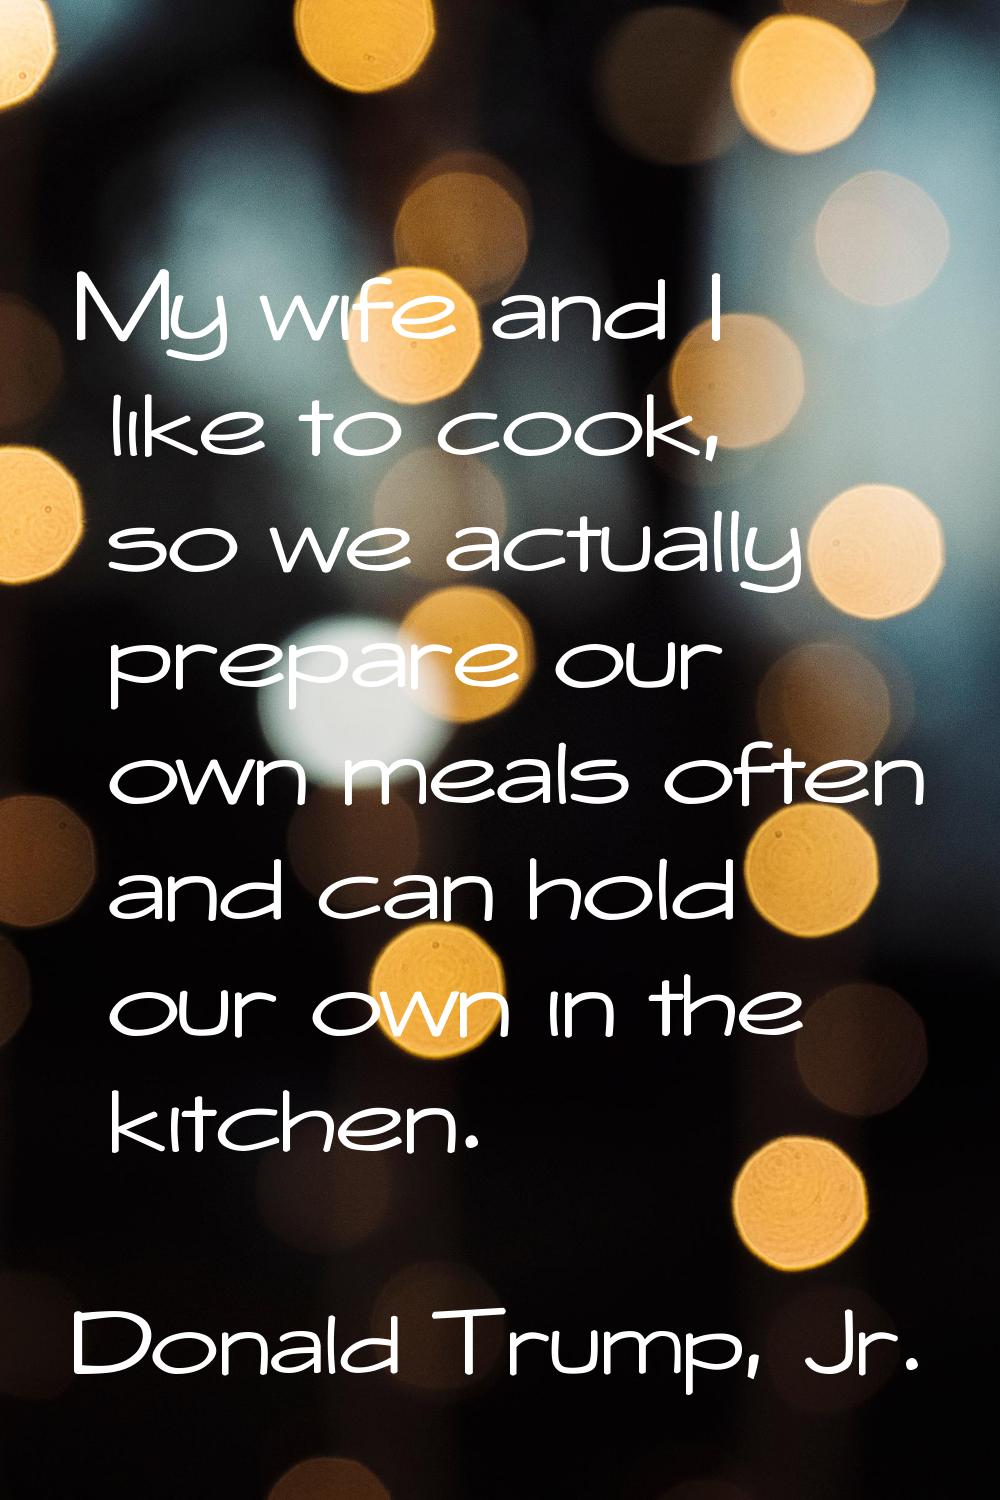 My wife and I like to cook, so we actually prepare our own meals often and can hold our own in the 